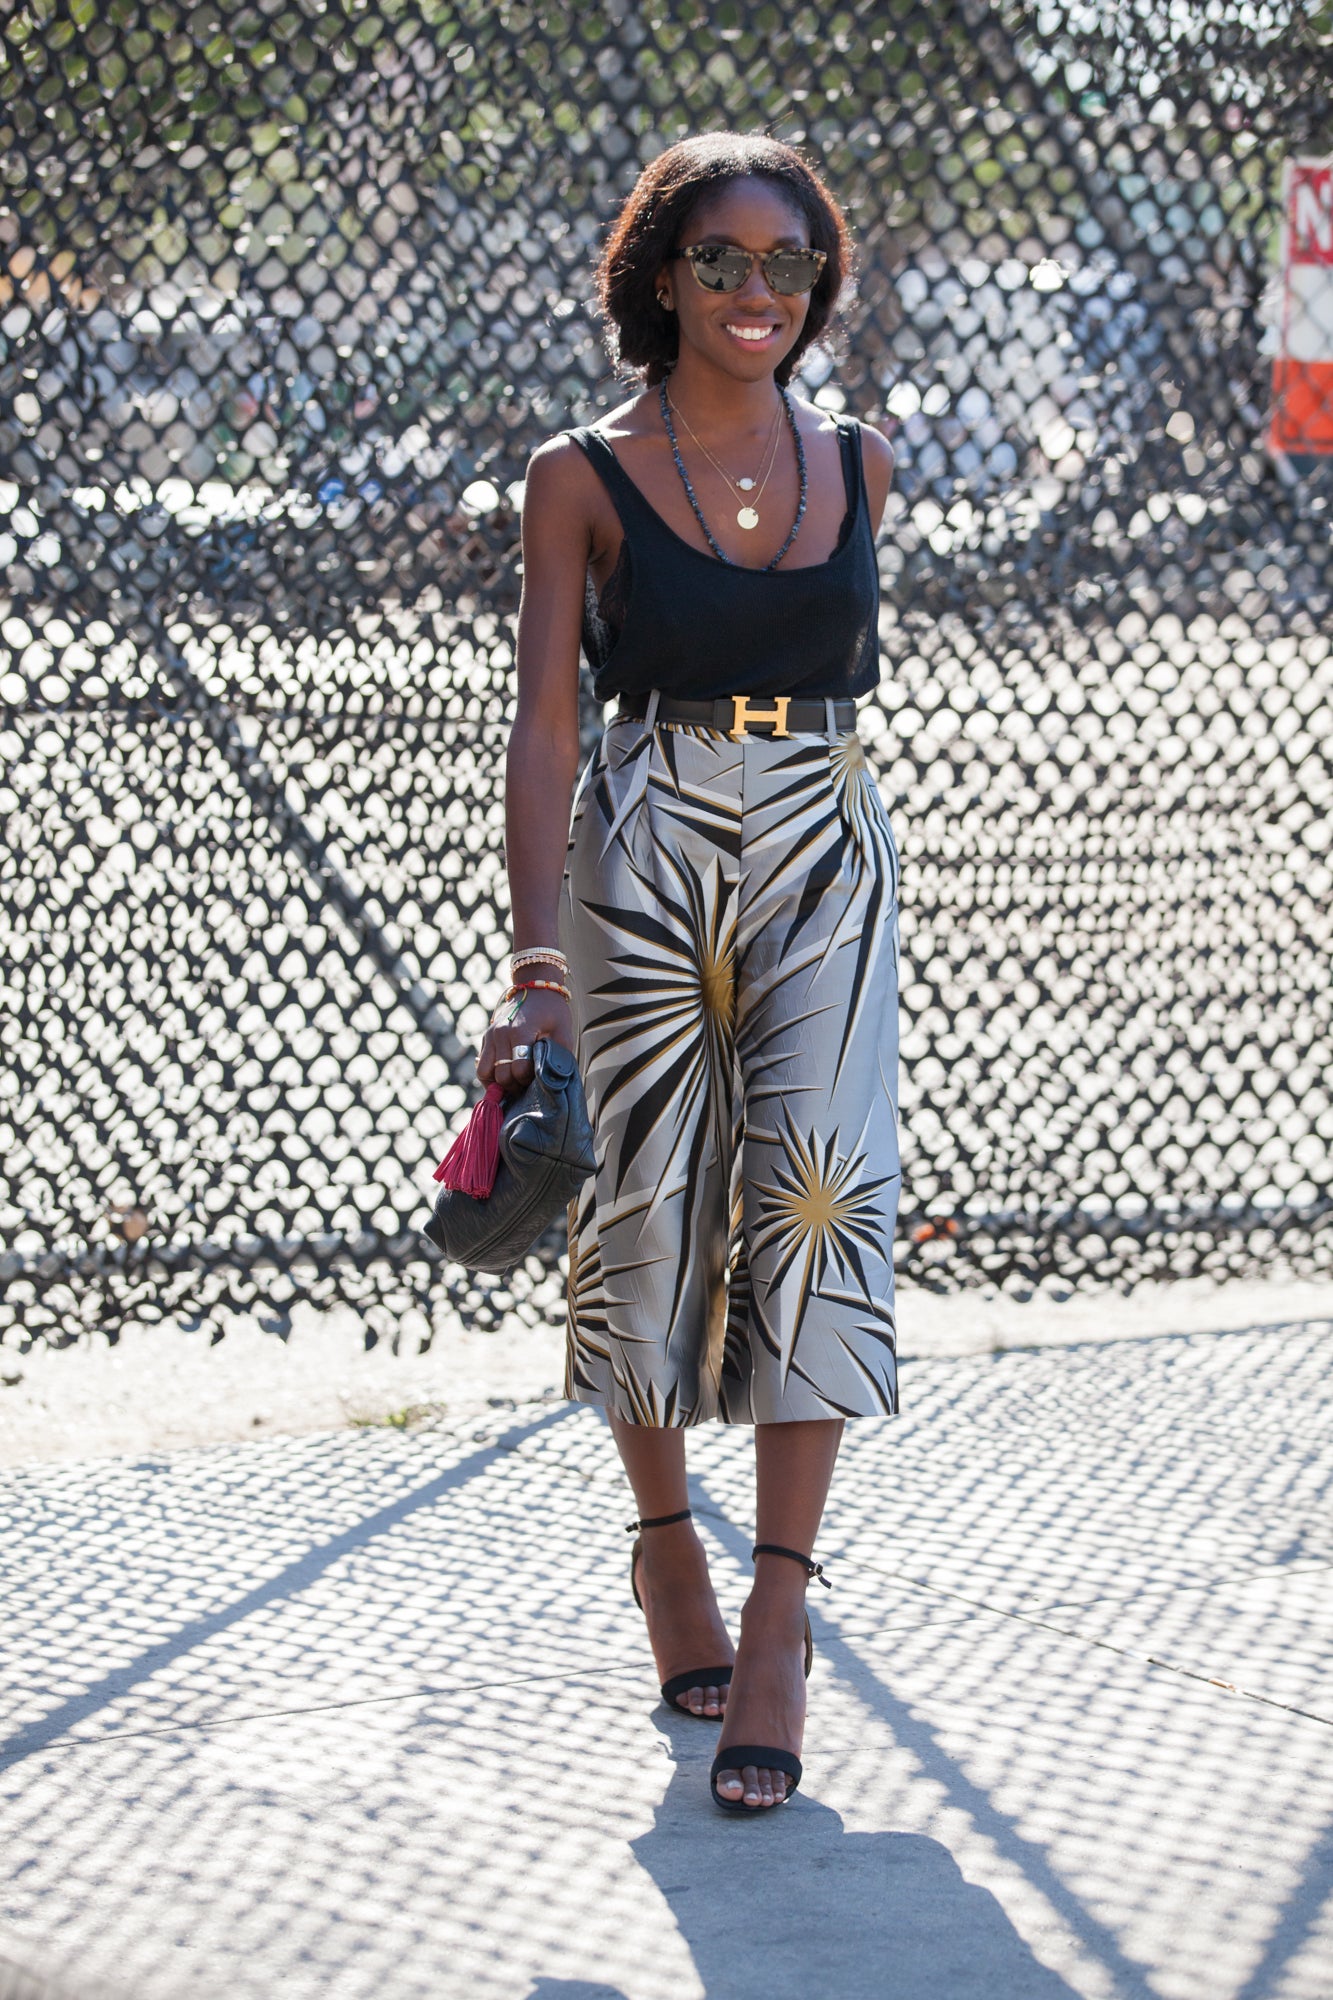 21 Outfits You'll Definitely Want To Rock This Spring